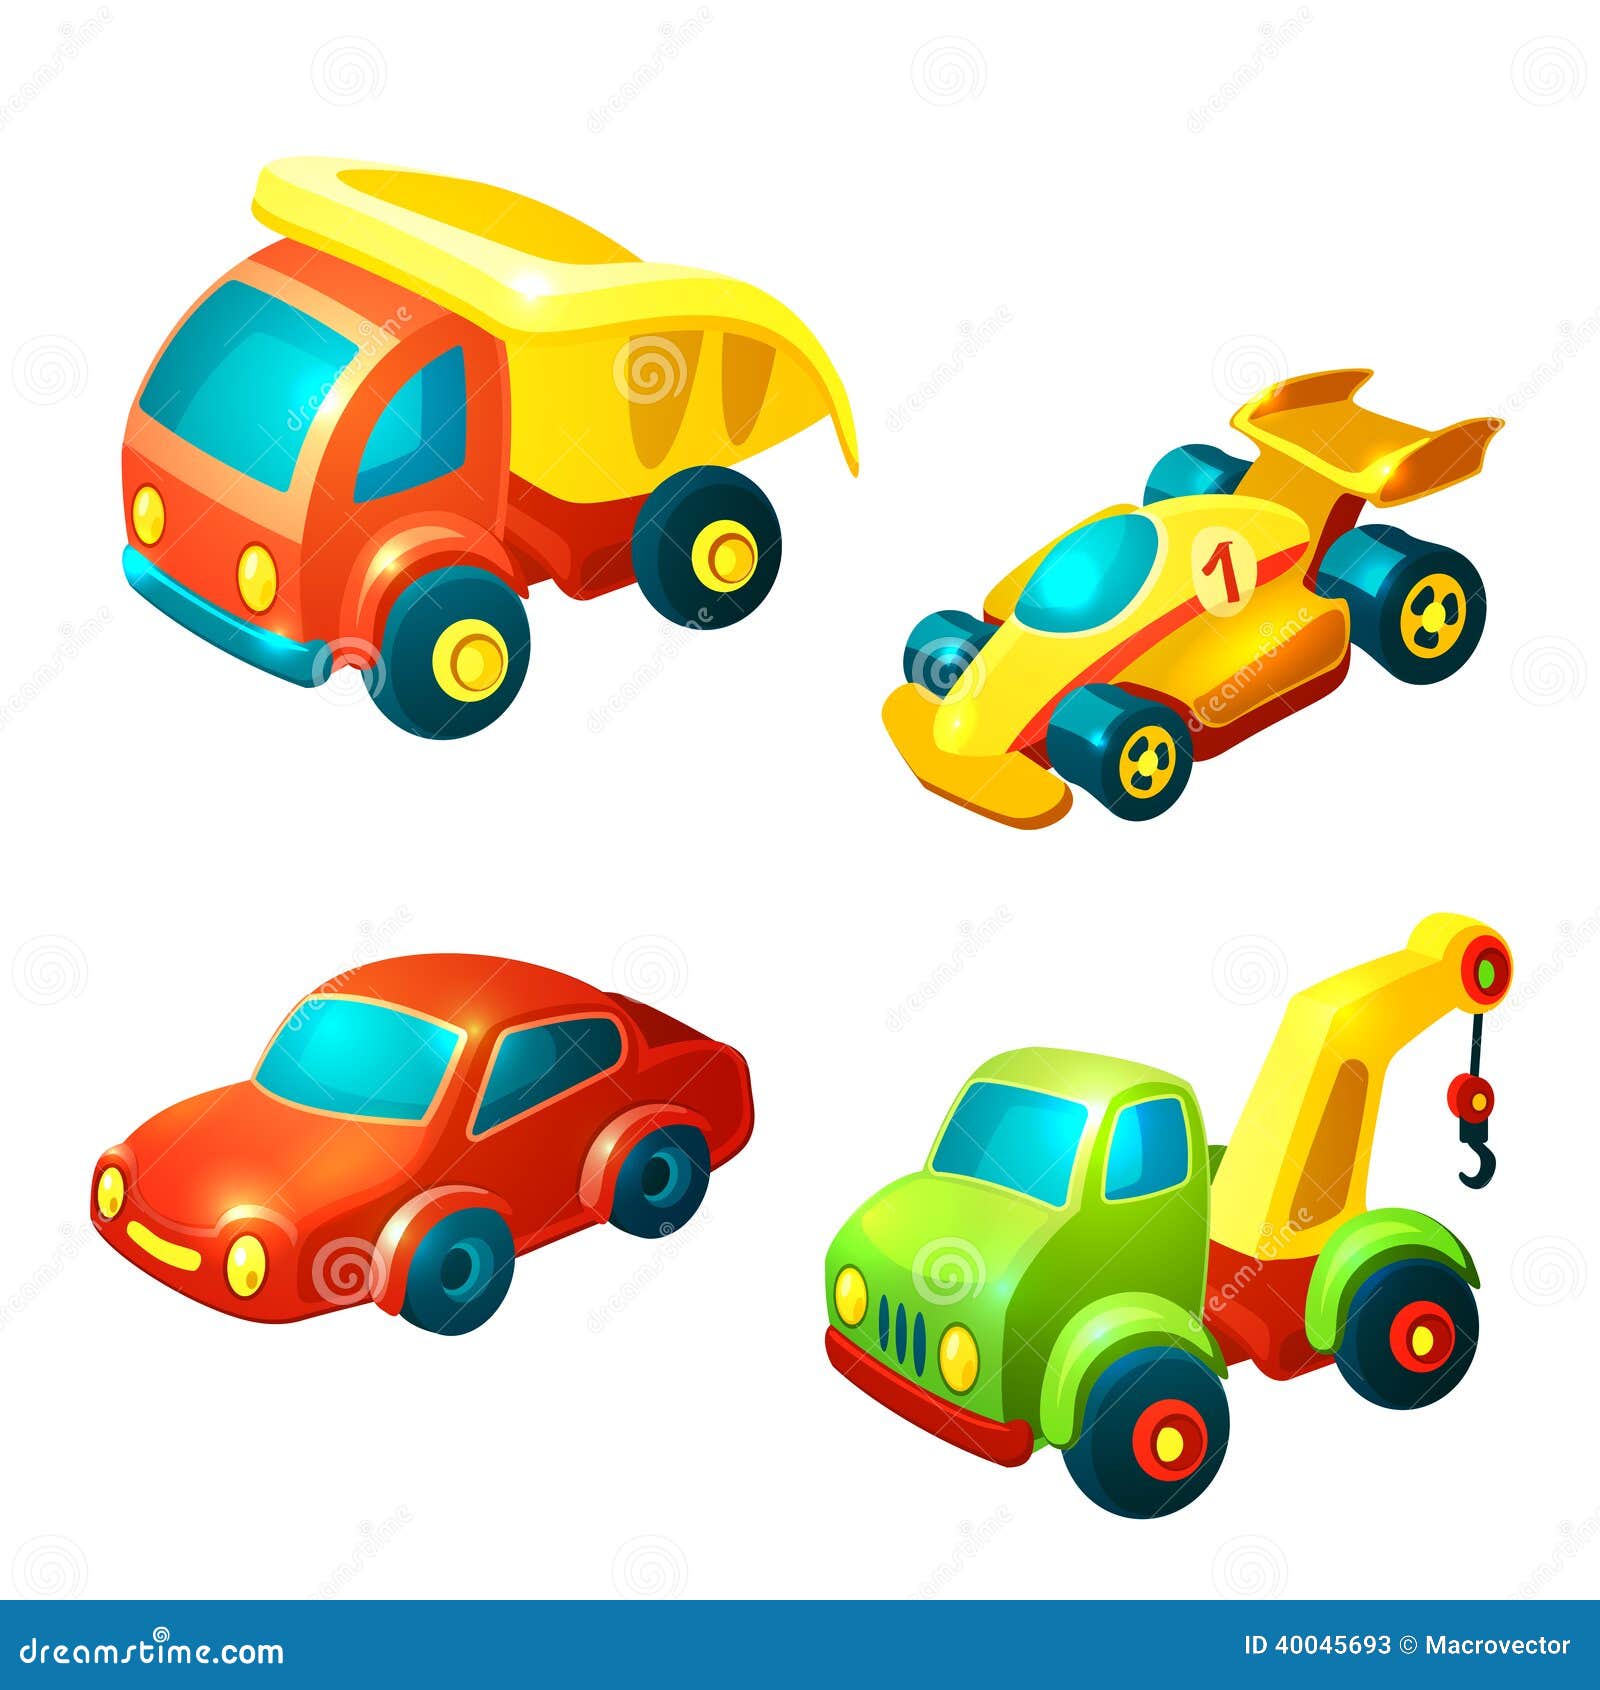 mr. clipart car'n truck collection - photo #7